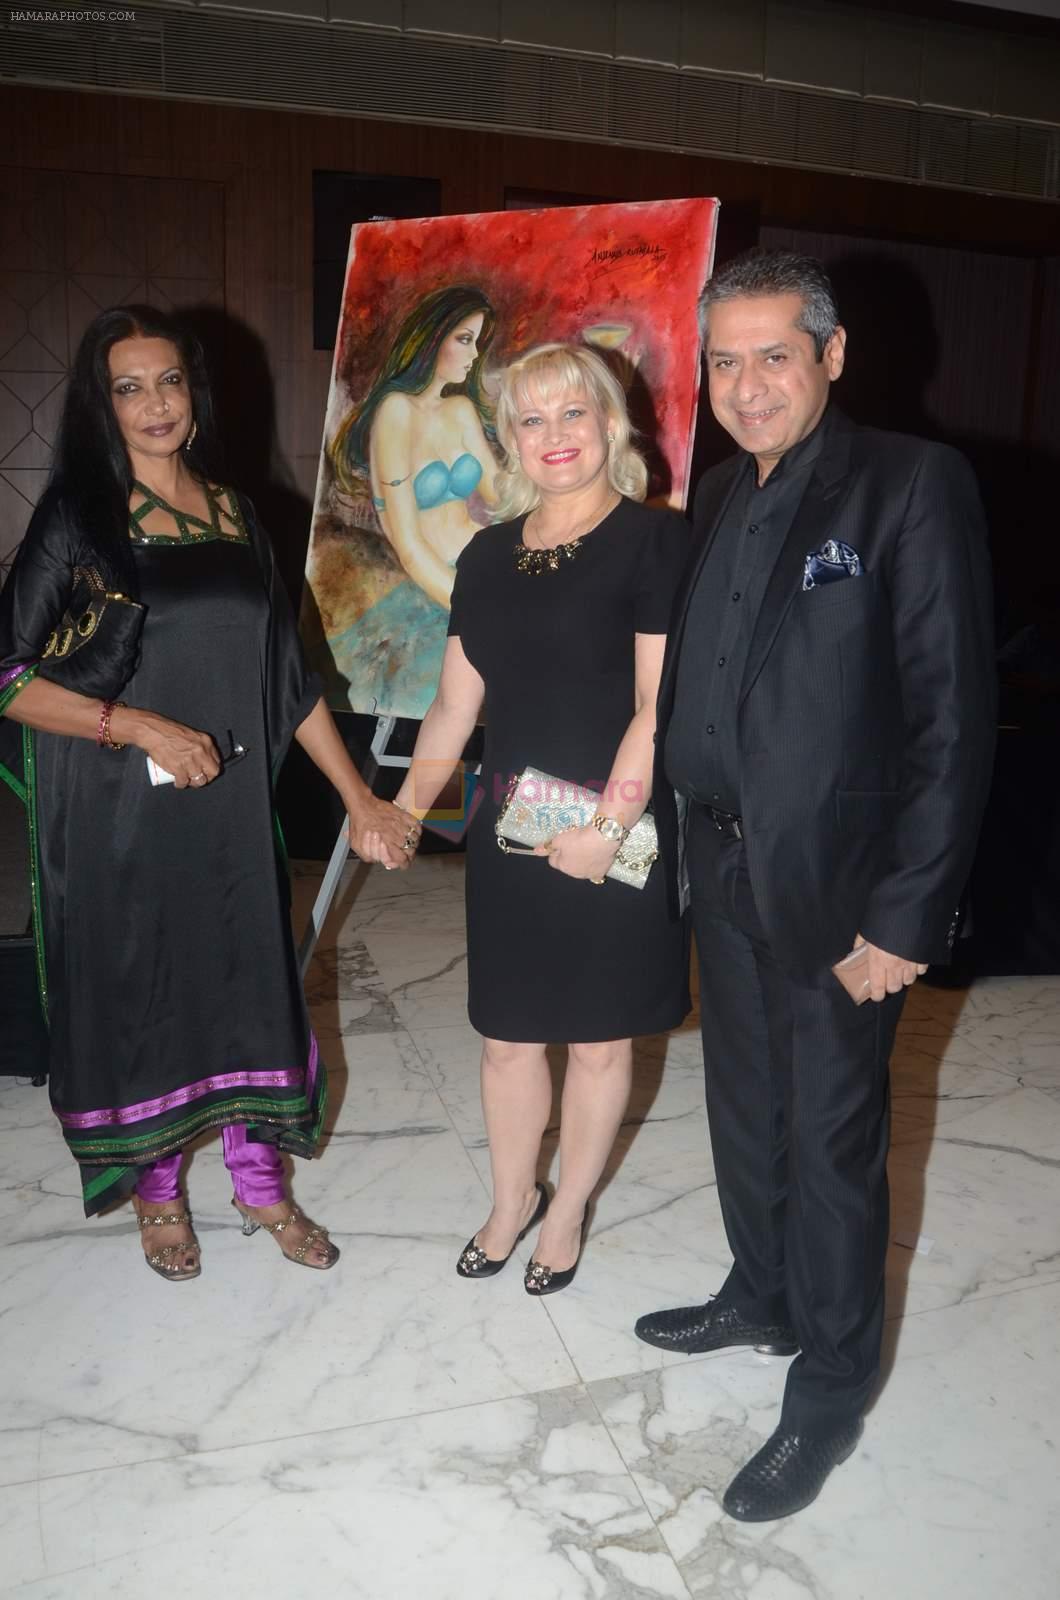 at Tarun Sarda's Martin Queen's exhibition with Calendar Girls in Enigma on 31st Aug 2015